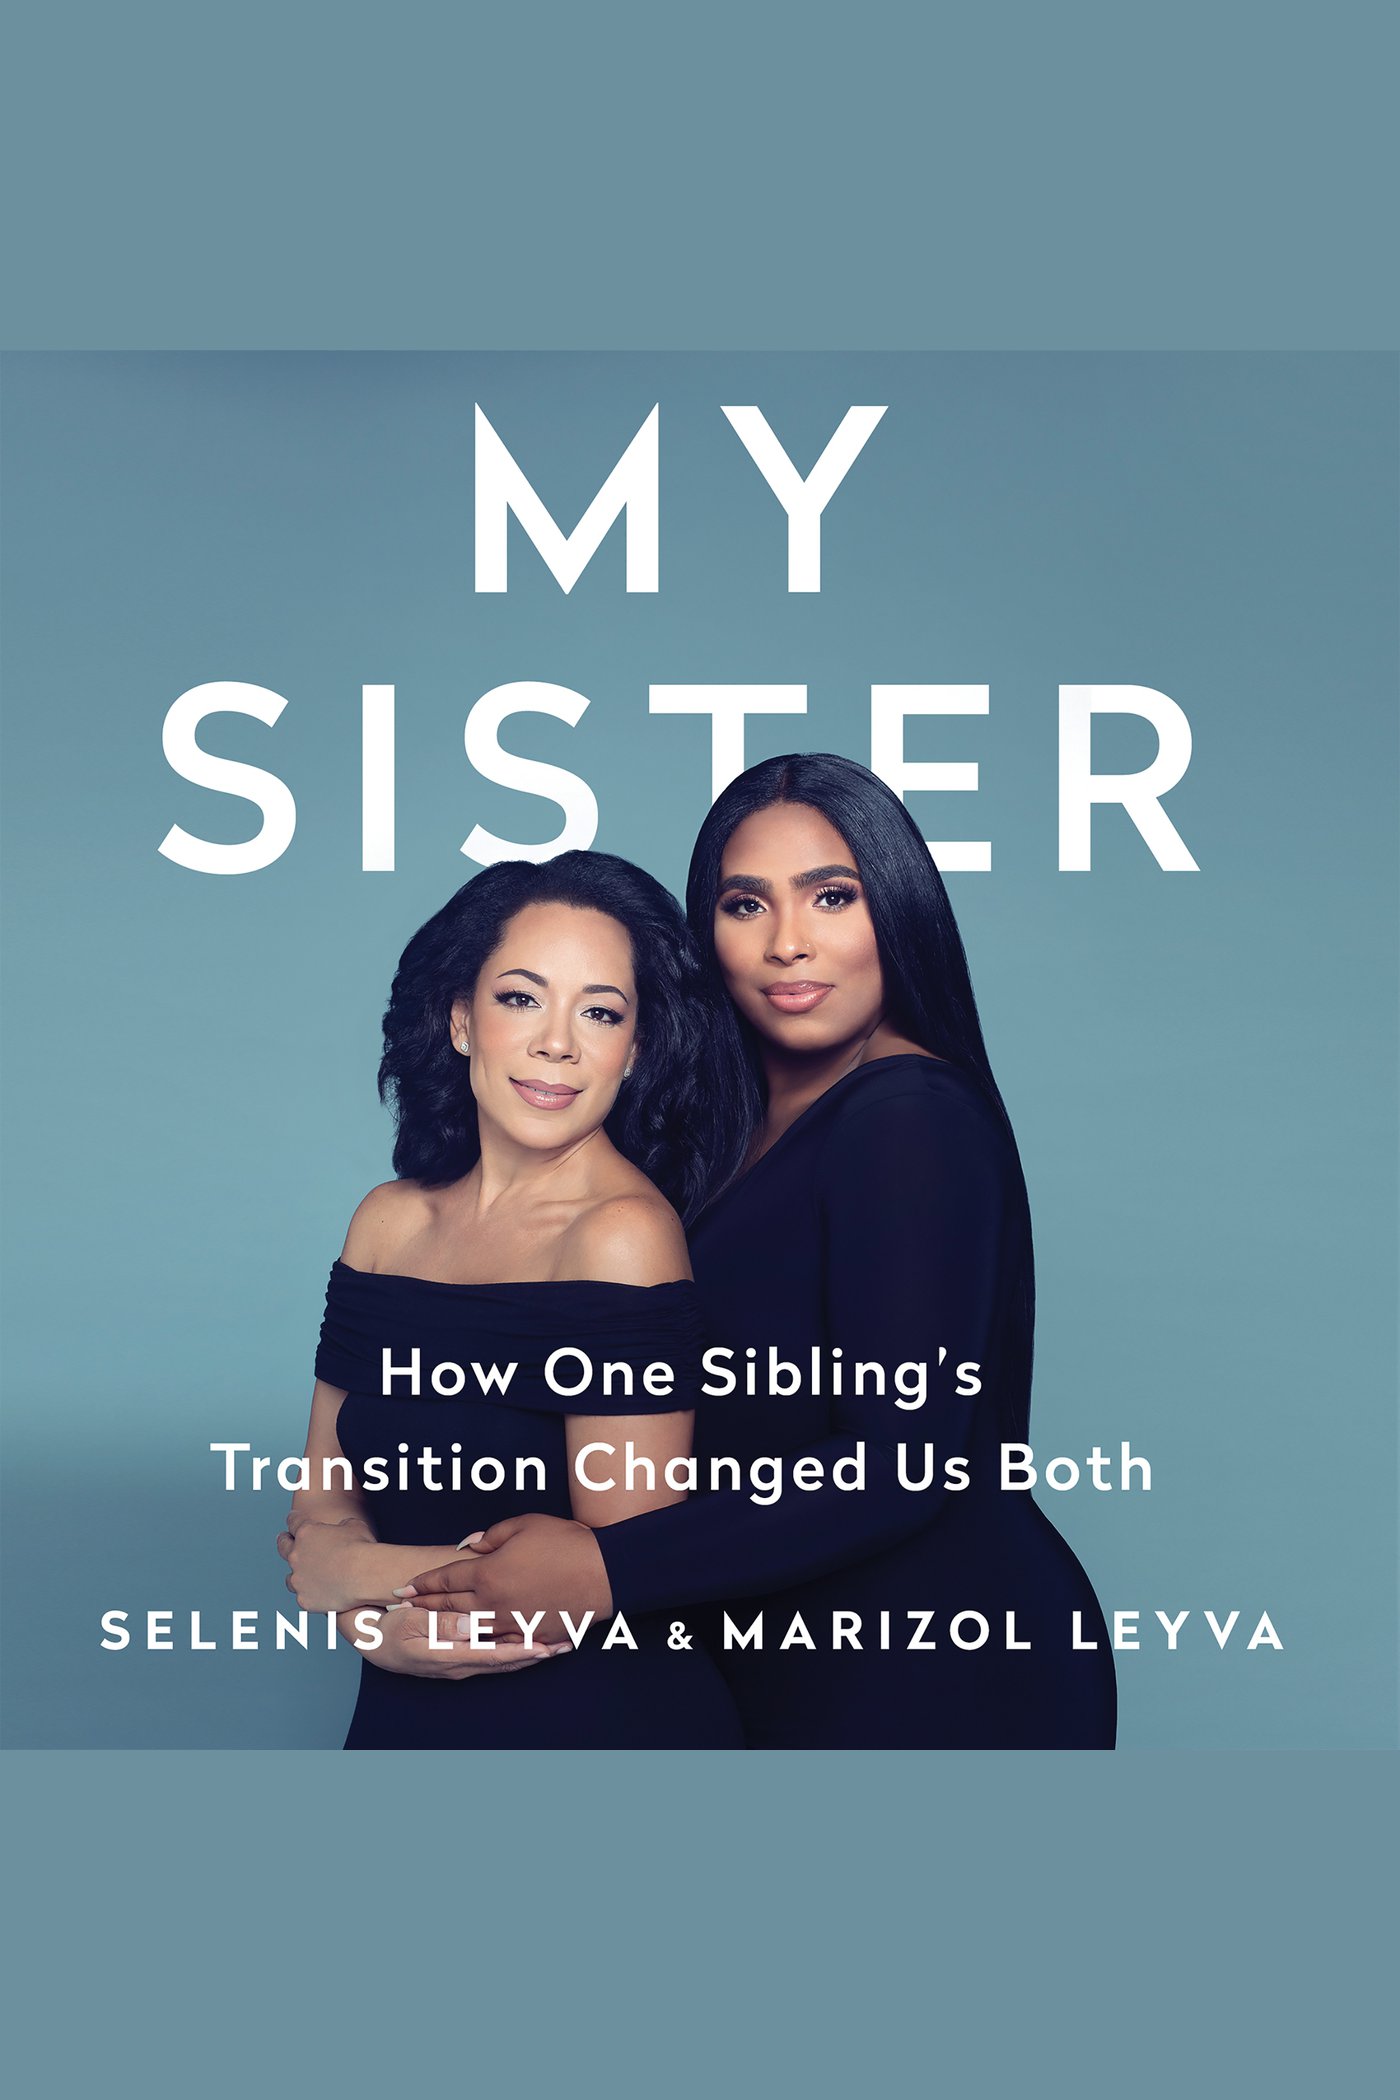 My Sister How One Sibling's Transition Changed Us Both cover image